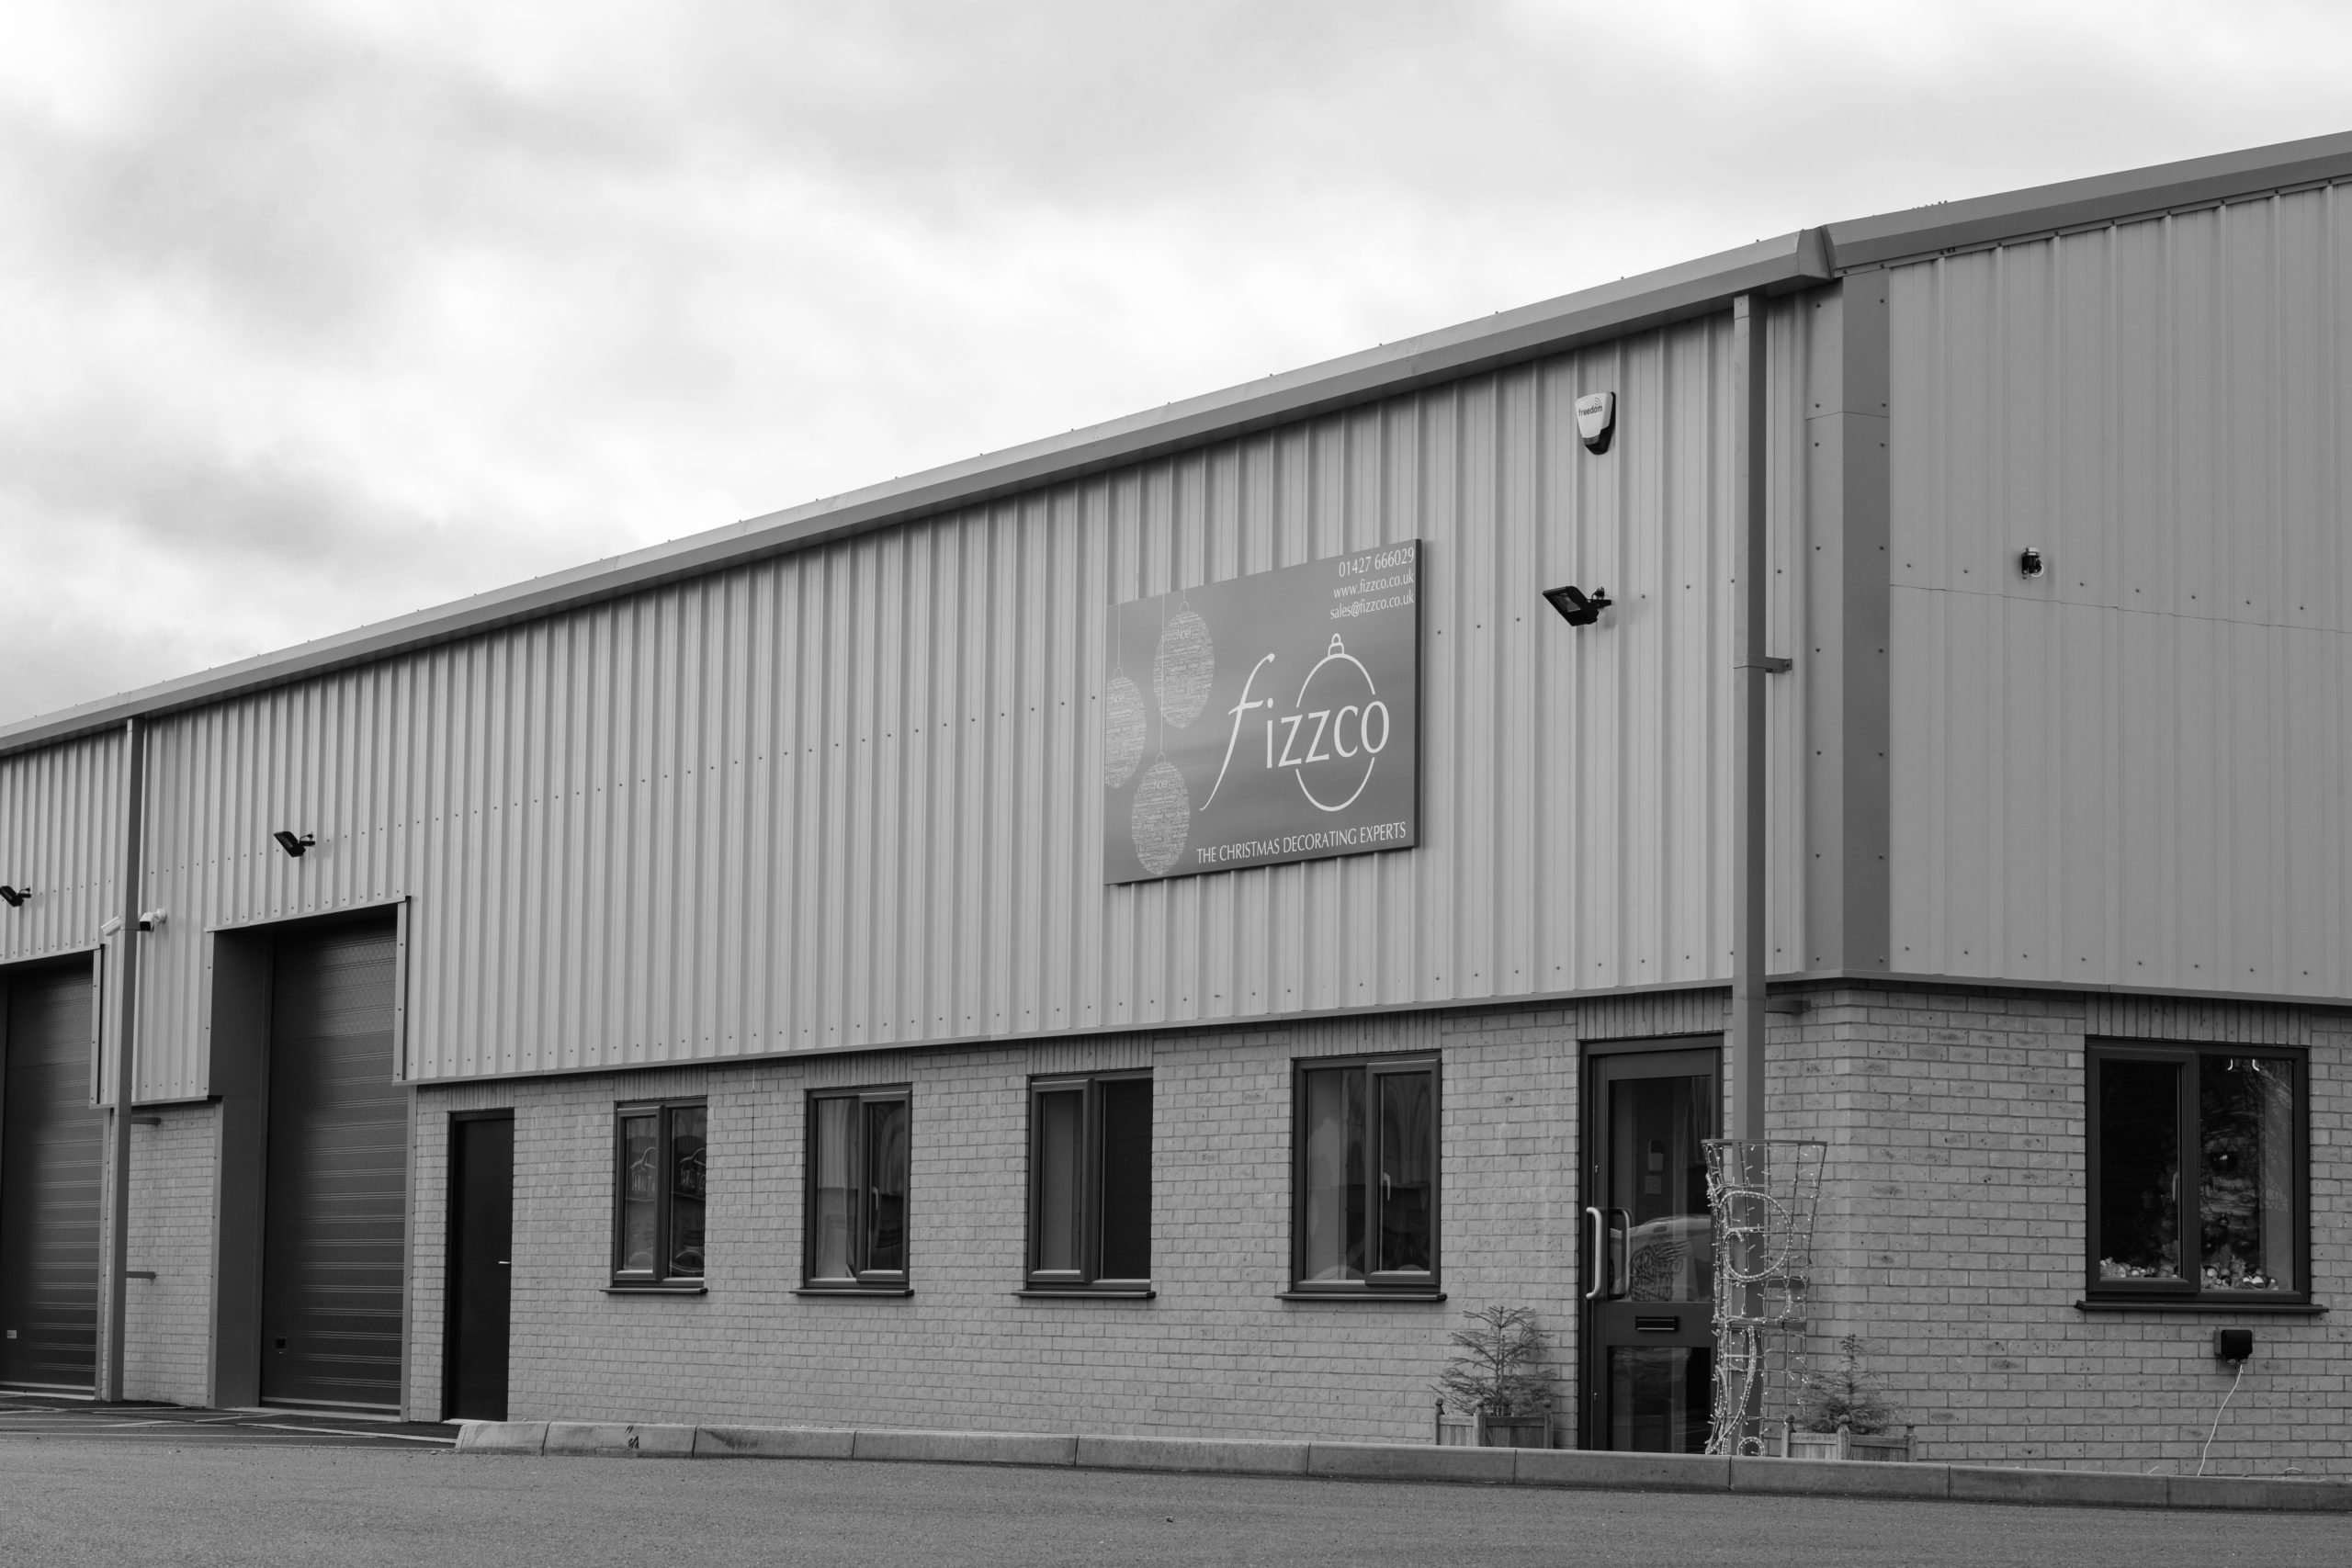 A black and white image of the oustide of Fizzco's office building.